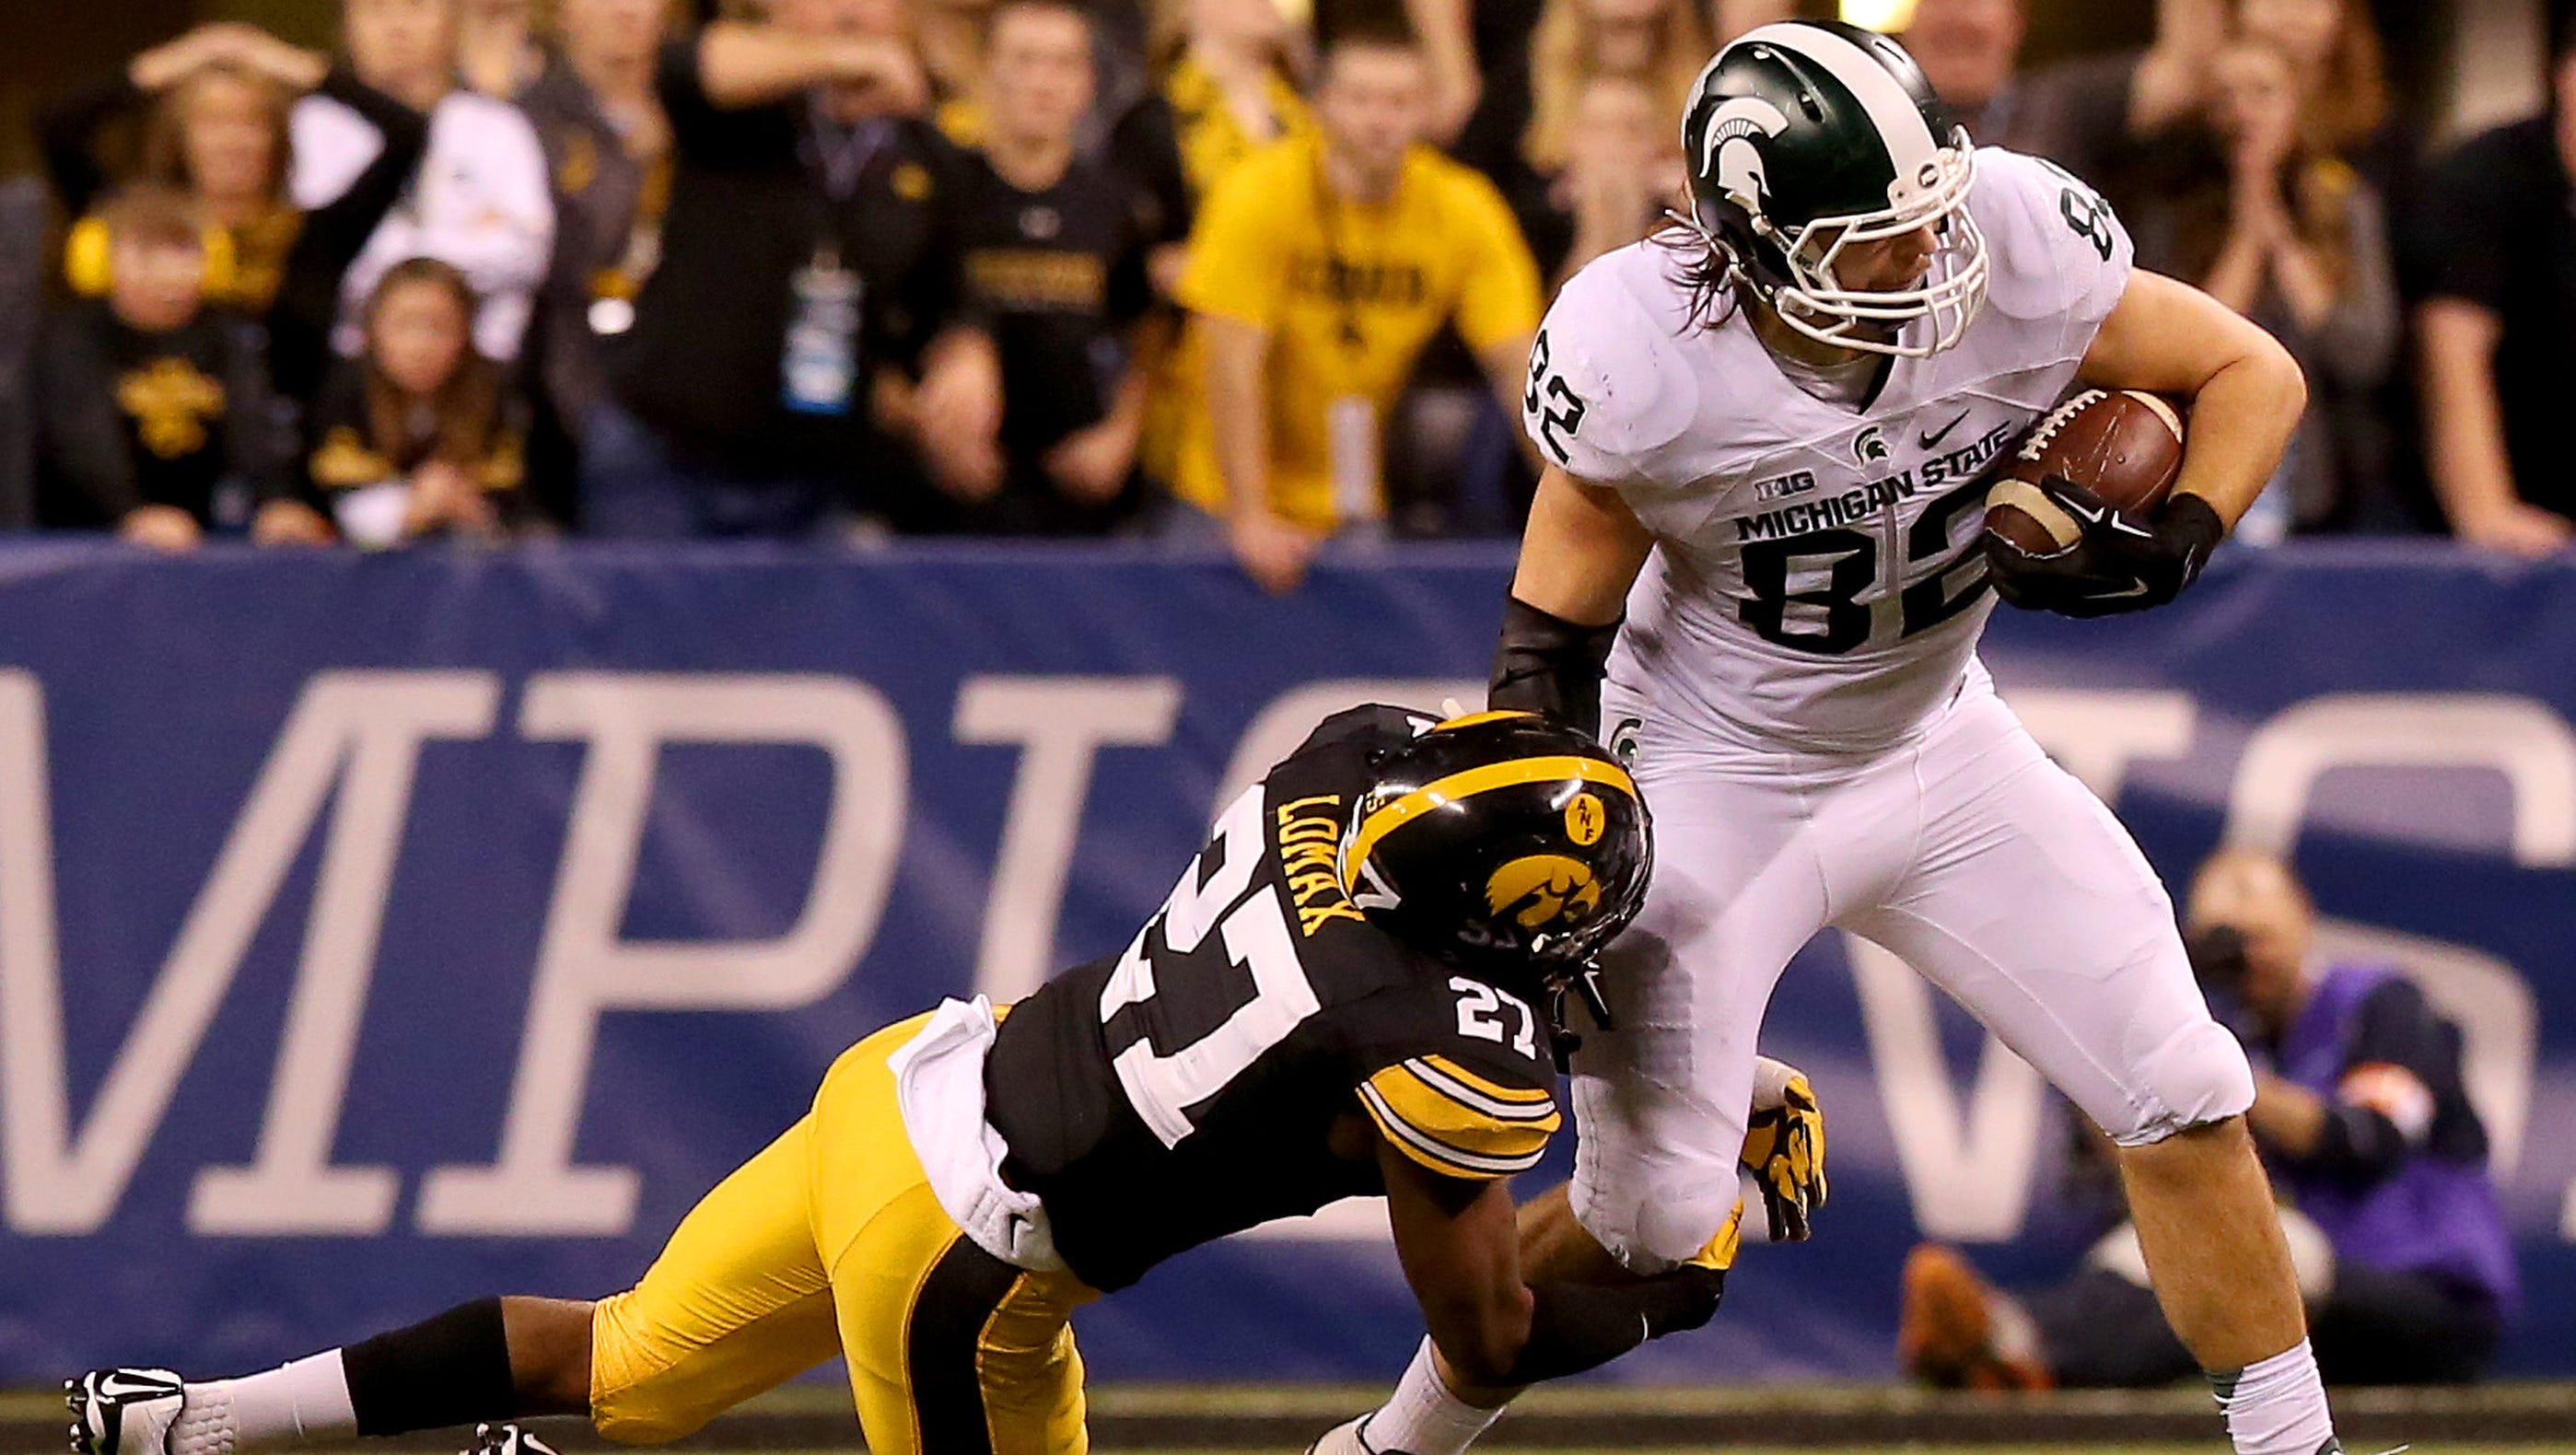 Michigan State tight end Josiah Price (82) breaks a tackle by Iowa defensive back Jordan Lomax (27) during the Big Ten Championship Game at Lucas Oil Stadium on Dec. 5, 2015.